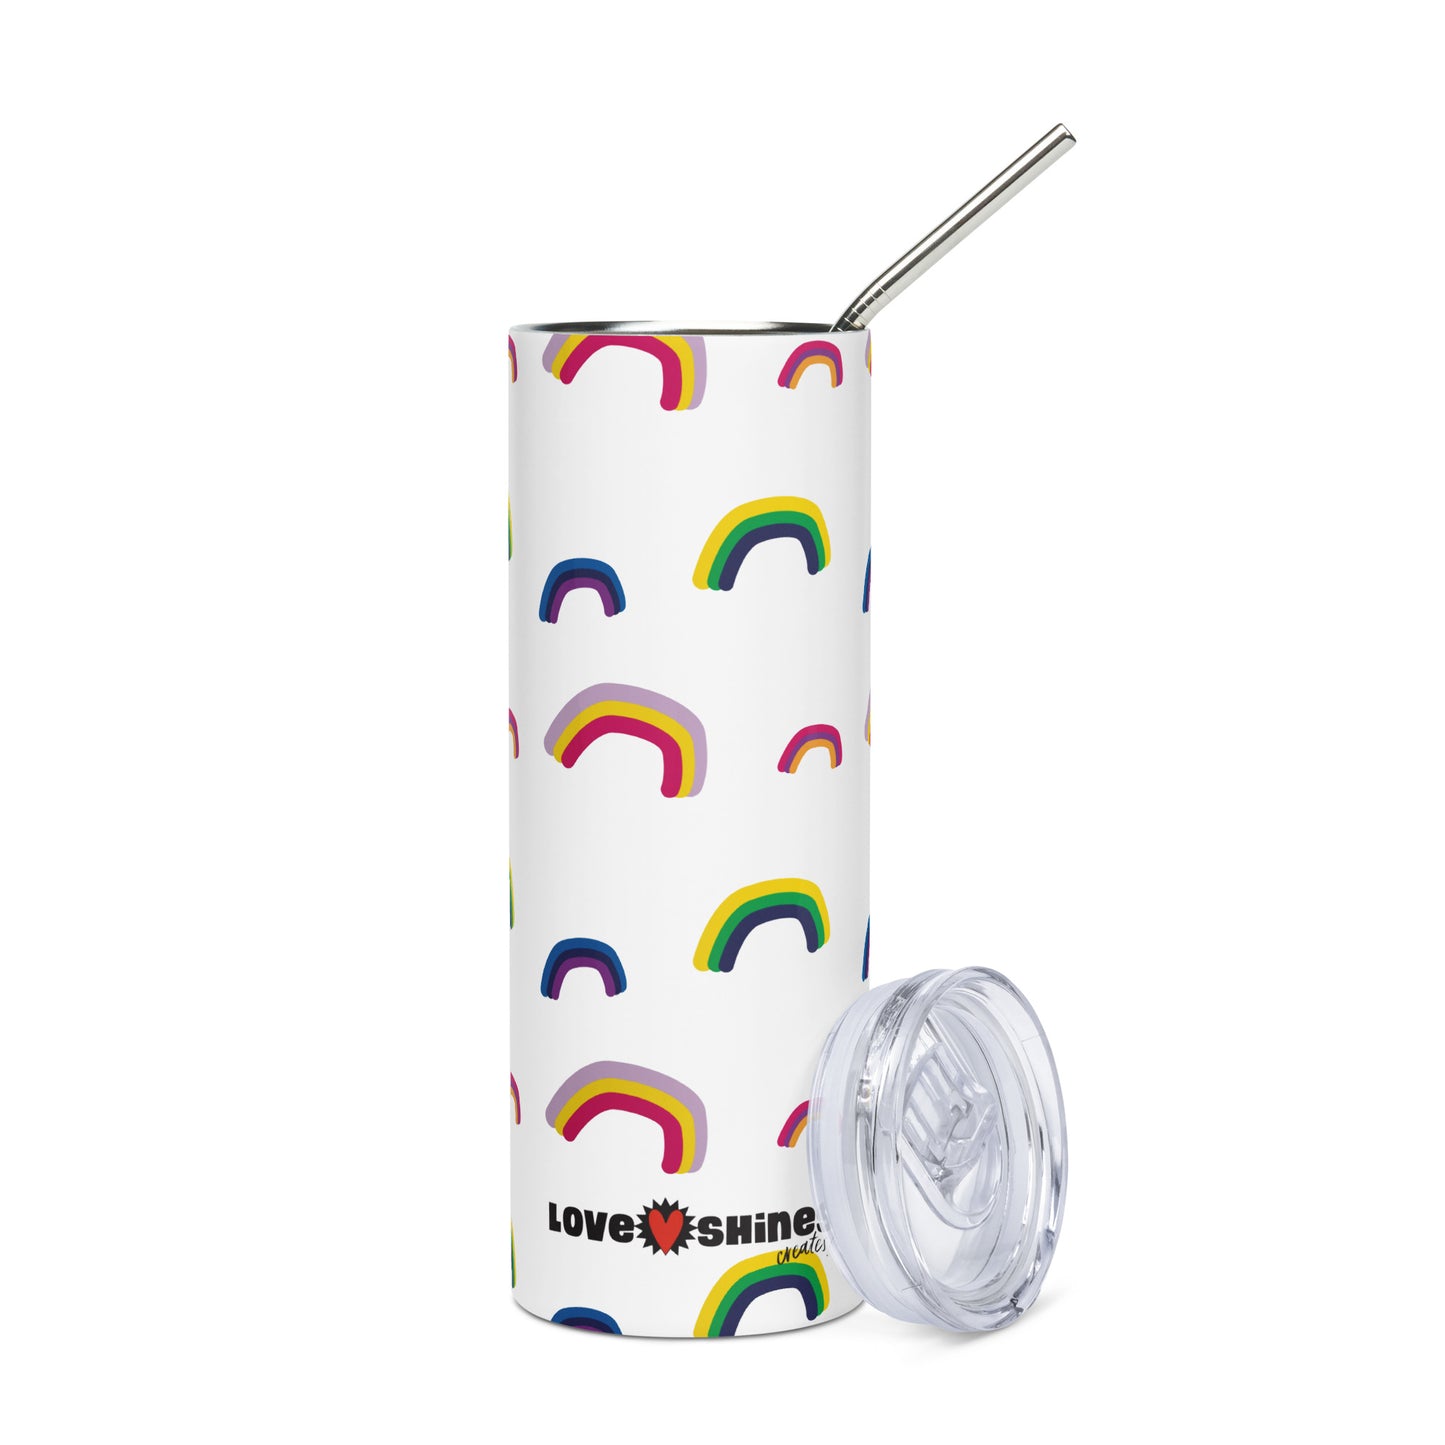 RAINBOW design Stainless Steel Hot Cold 20oz Tumbler